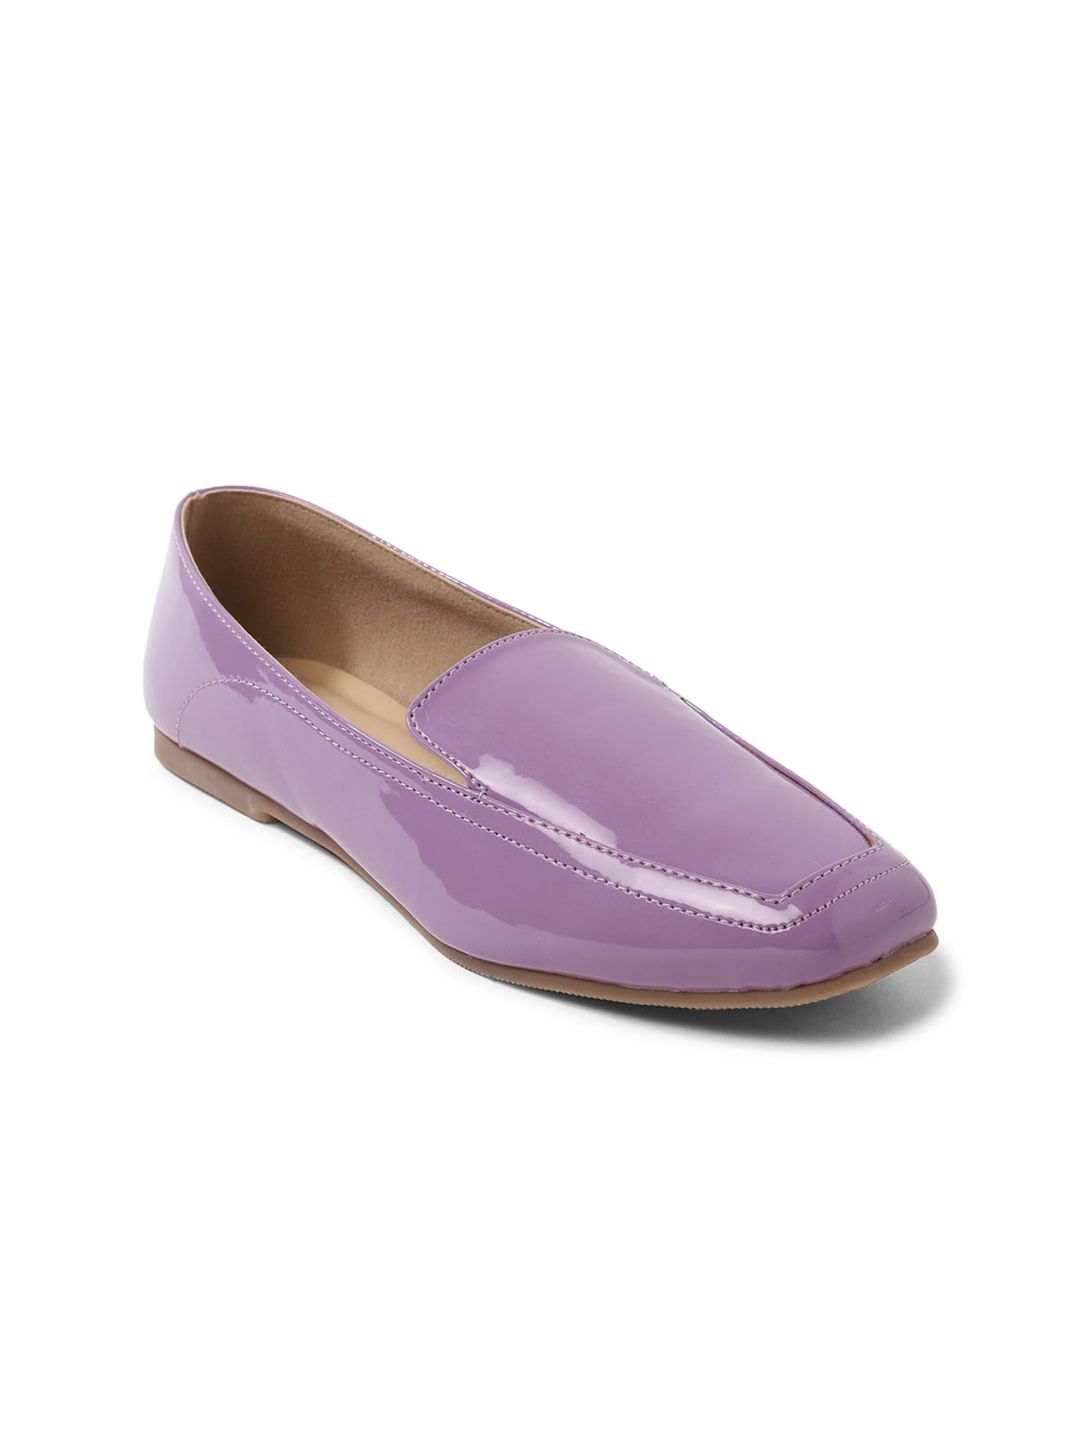 FOREVER 21 Women Purple PU Loafers Price in India